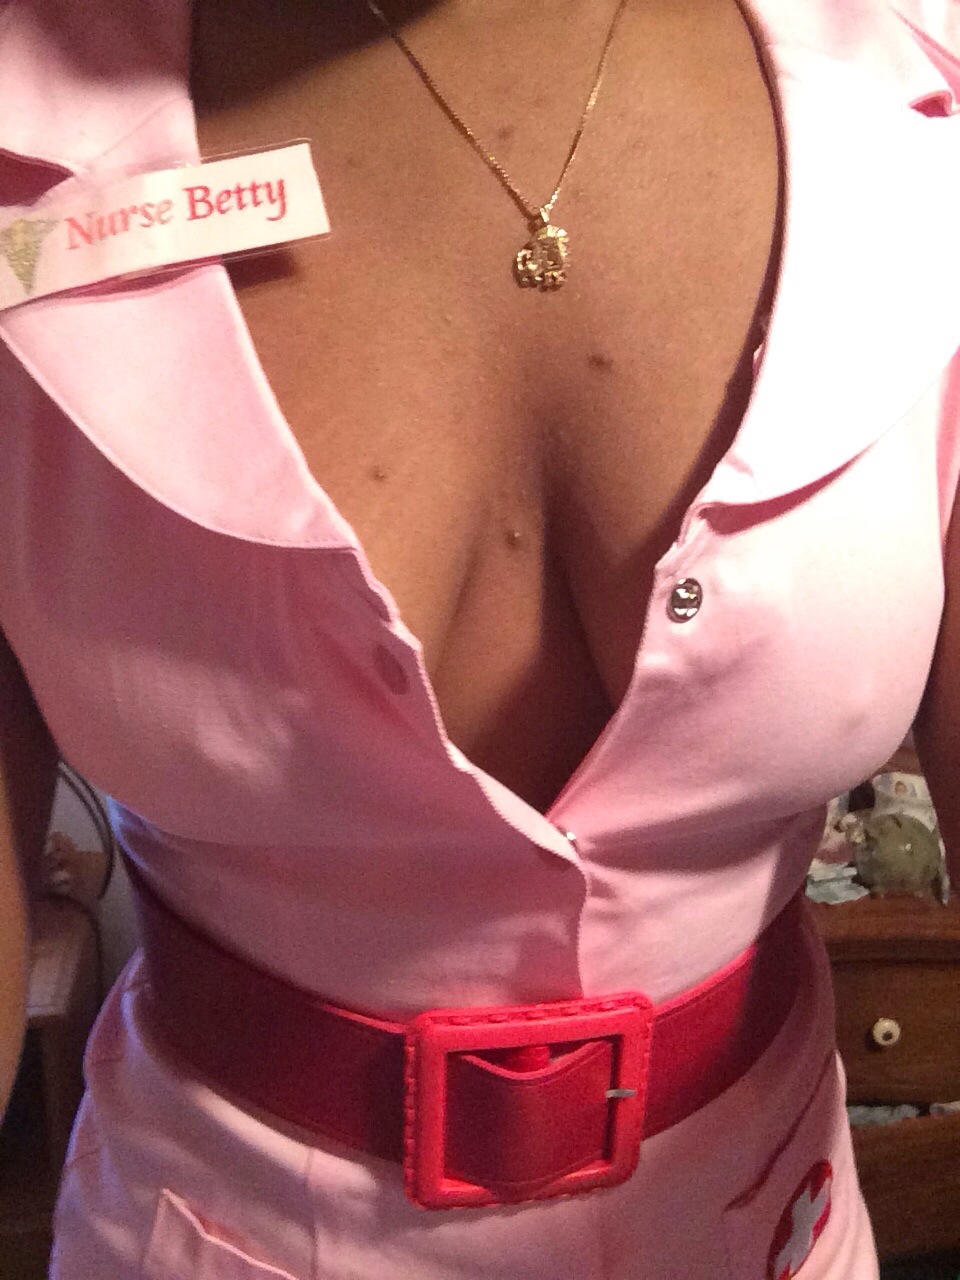 Cara in a pink nurse Betty outfit in post titled small fry 